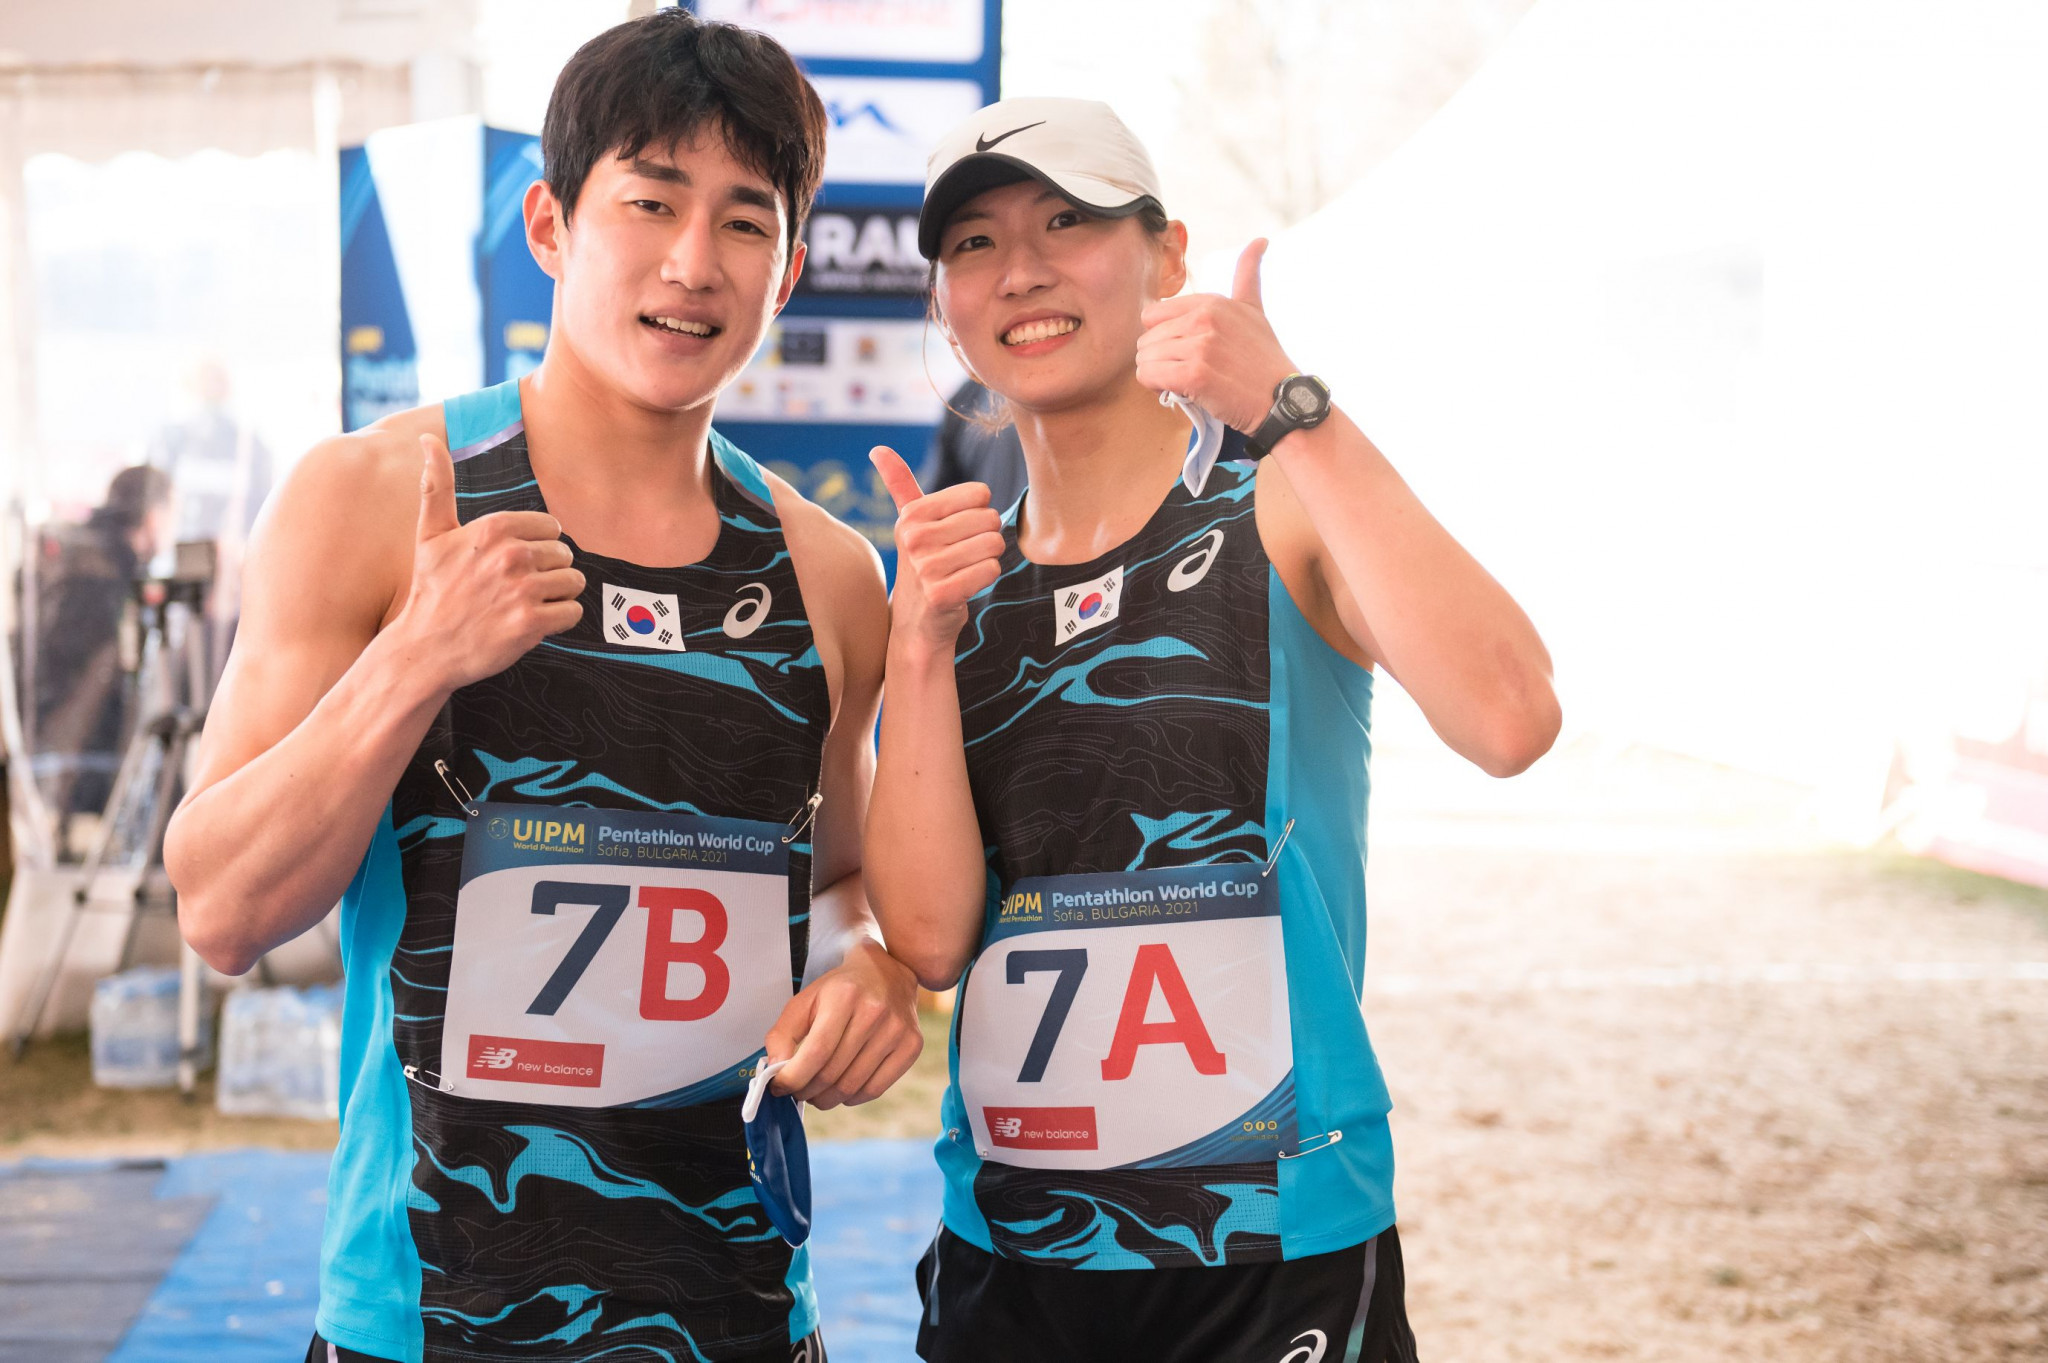 The South Korean pairing of Unju Kim and Changwan Seo moved up from seventh to third place in the laser run that concluded the mixed relay at the UIPM World Cup in Sofia ©UIPM